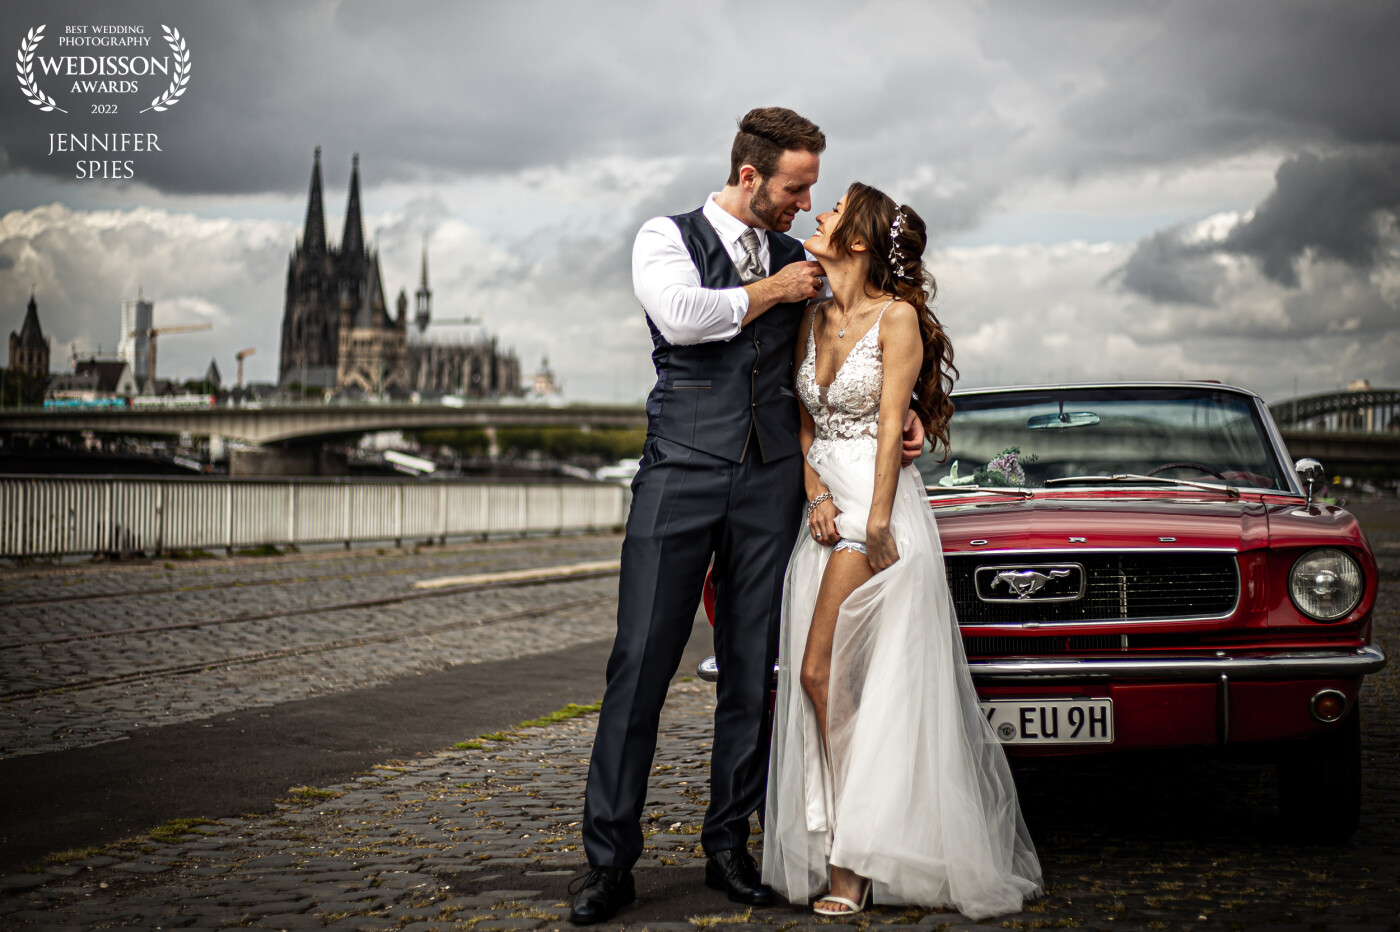 It was such a great wedding shooting in front of the landmark of Cologne, the Cologne Cathedral. Of course, the perfect wedding car should not be missing: the 1966 Ford Mustang.